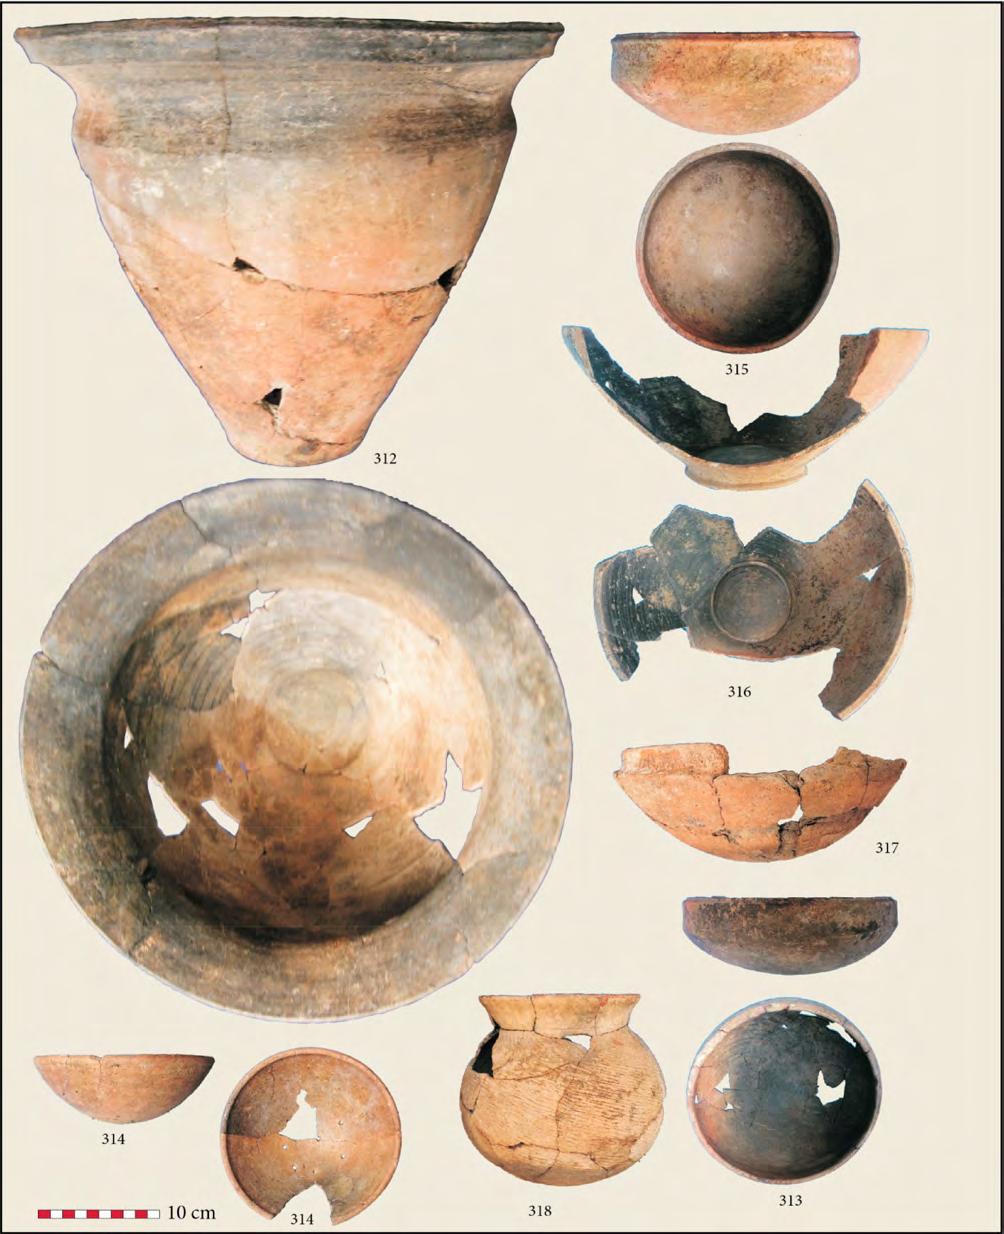 JOURNAL OF INDO-PACIFIC ARCHAEOLOGY 34 (2014) Figure 33: The ceramic vessels found in the kiln B2 5:6 feature 1. from the Bronze Age contexts seen at Ban Non Wat through to the late Iron Age.